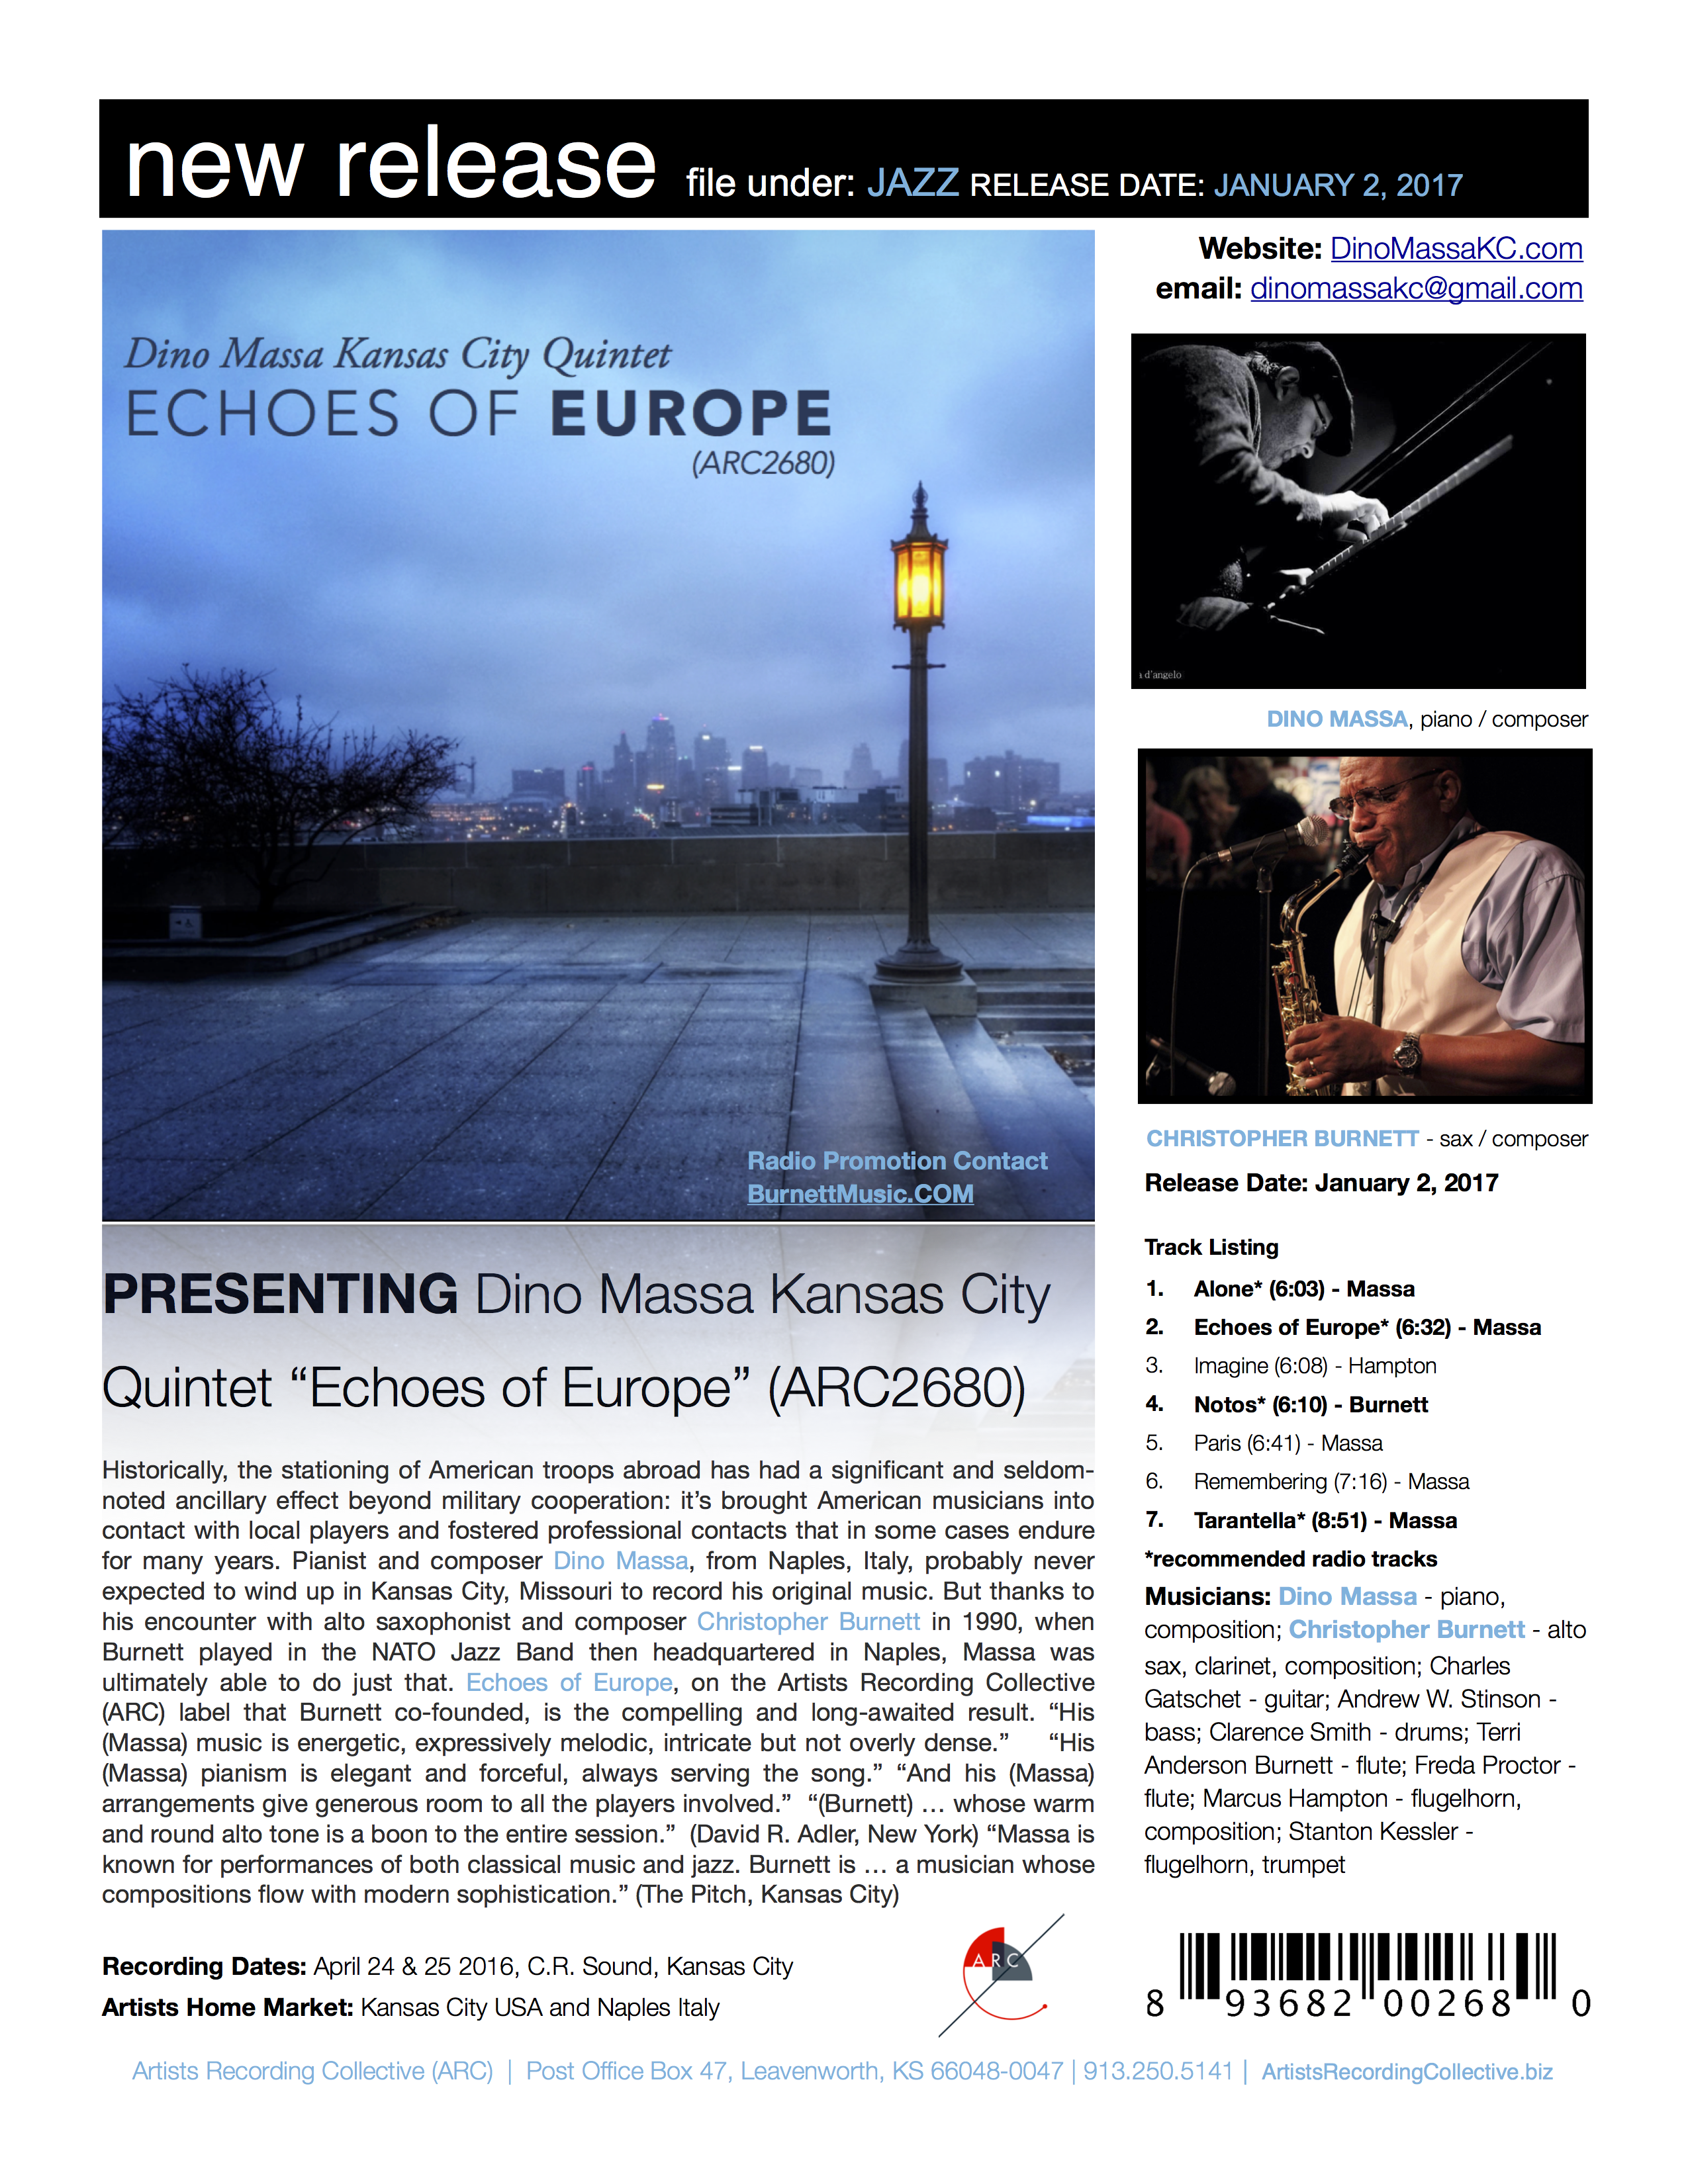 REQUEST A COPY OF "ECHOES OF EUROPE" FOR YOUR JAZZ RADIO PROGRAM TO: Artists Recording Collective, LLC, Attn: Dino Massa Kansas City Quintet, operations@artistsrecordingcollective.biz